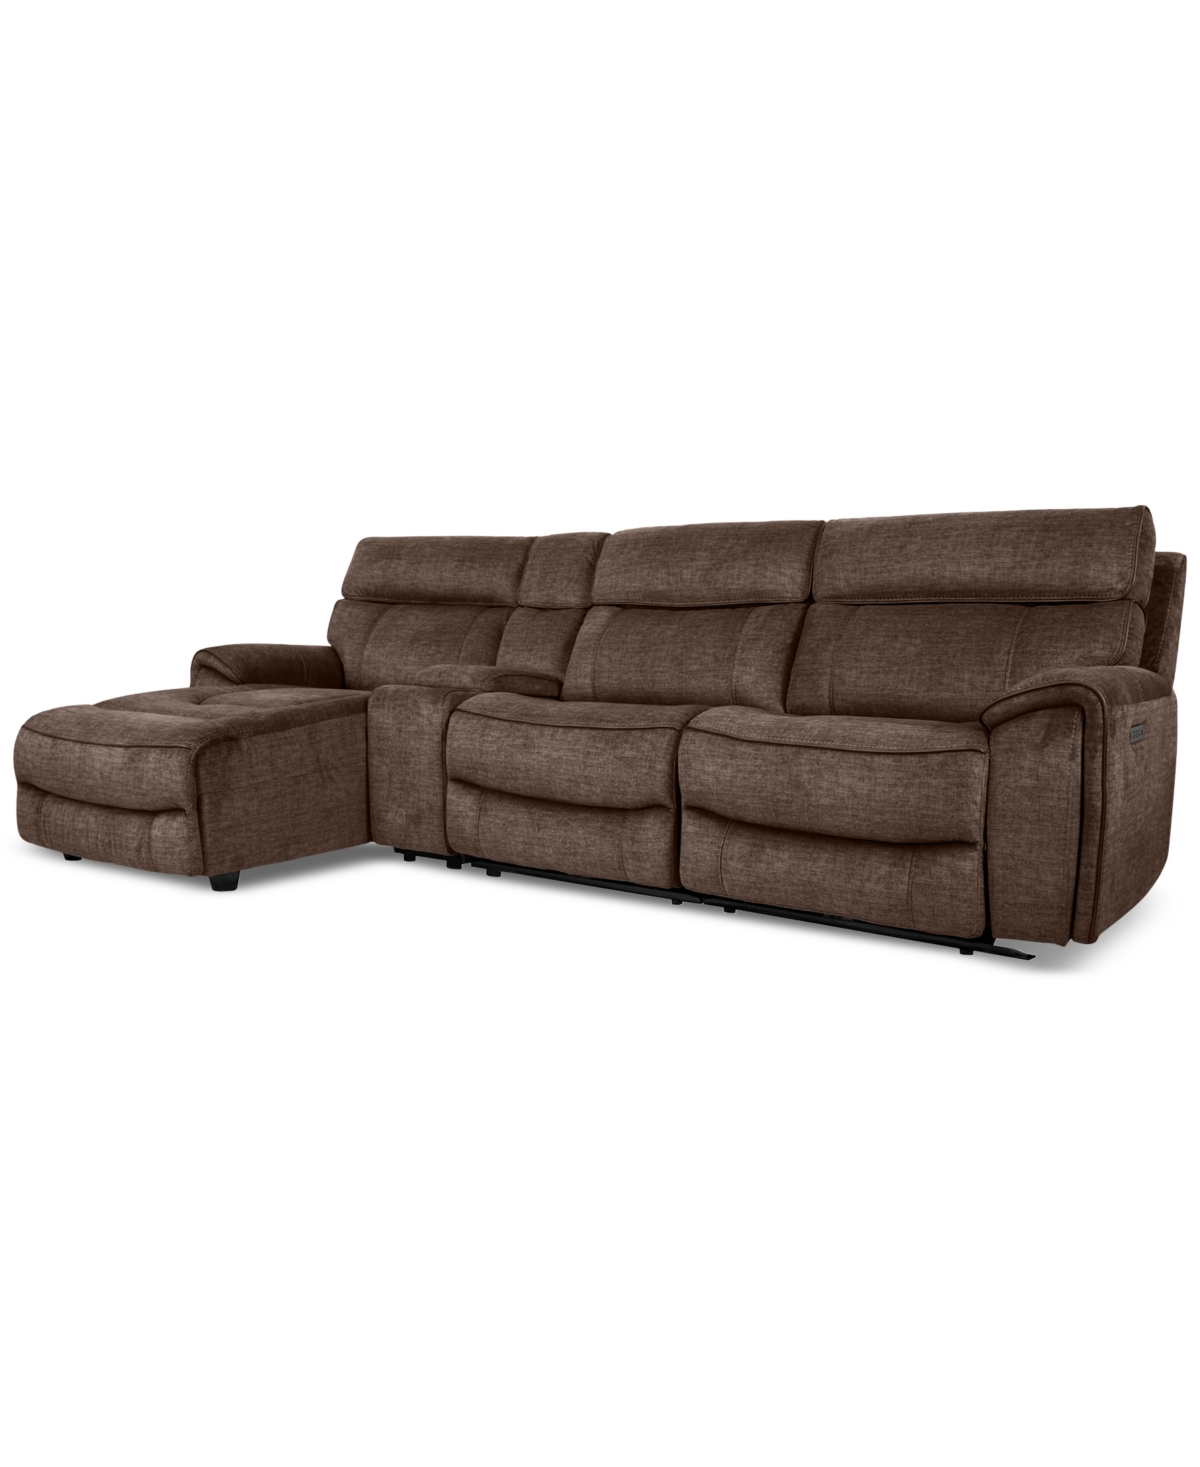 Furniture Hutchenson 4-pc. Fabric Chaise Sectional With 2 Power Recliners, Power Headrests And Console In Chocolate Brown